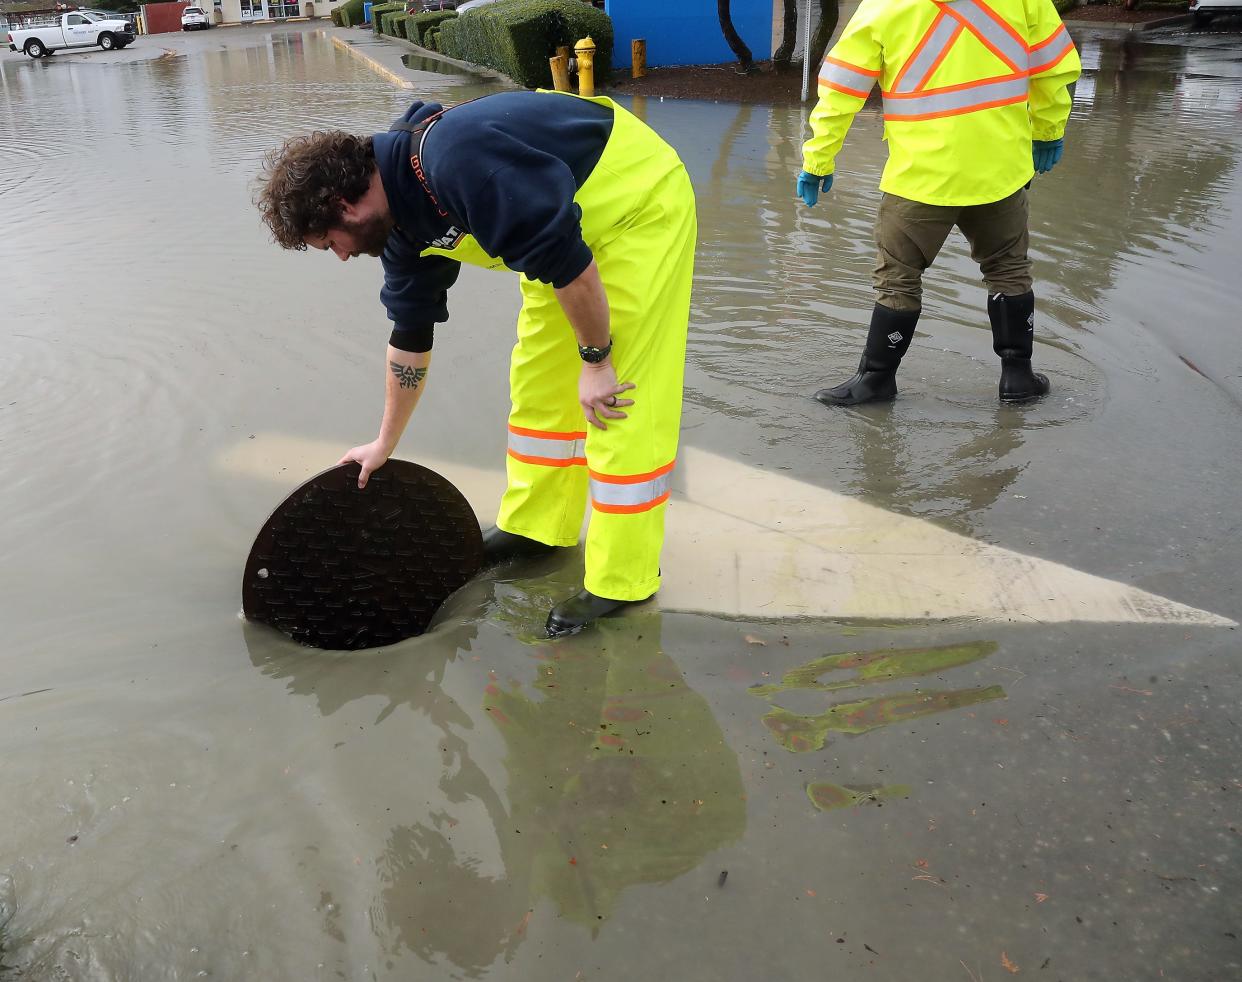 Zachary King, of Port Orchard Public Works, holds open a manhole cover as crews work to drain the flood water closing Bay Street in downtown Port Orchard on Tuesday, Dec. 27, 2022